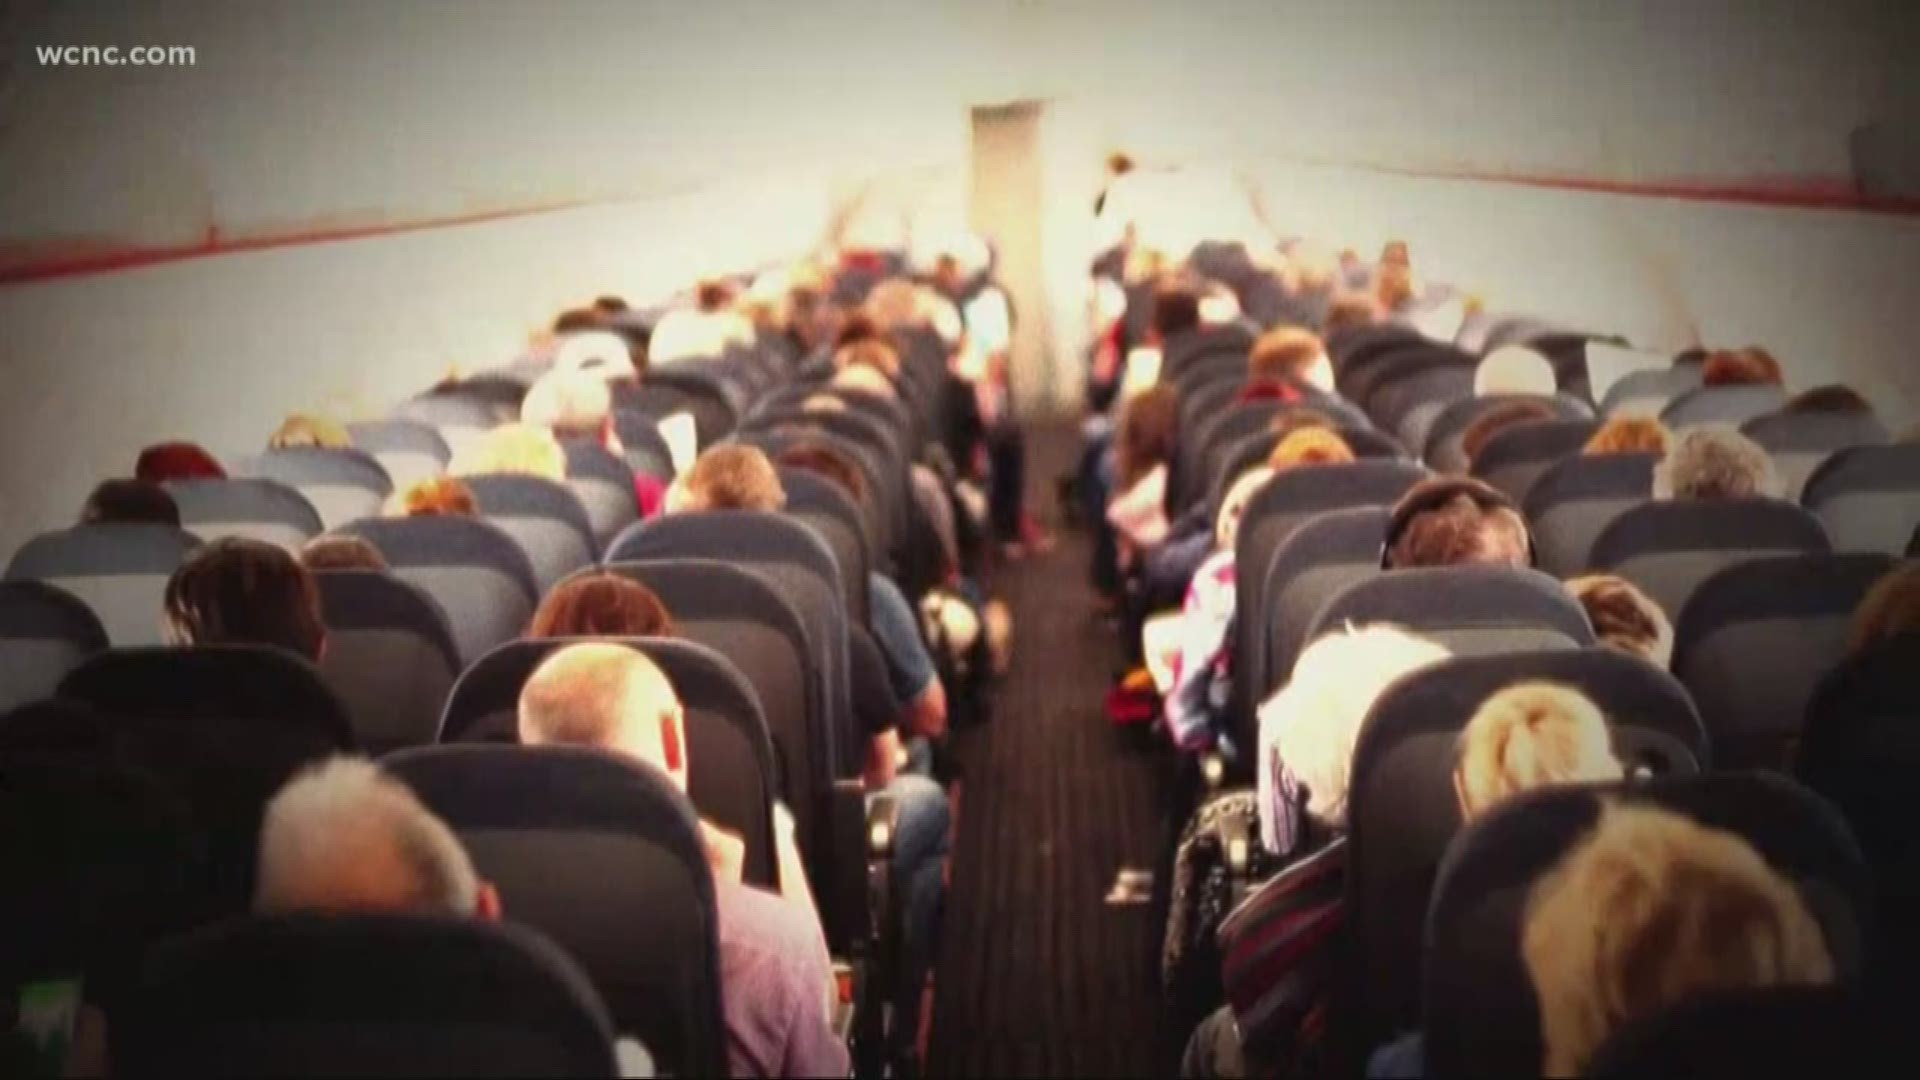 Videos have been circulating on social media of planes with only a handful of travelers onboard, especially in the case of international flight.